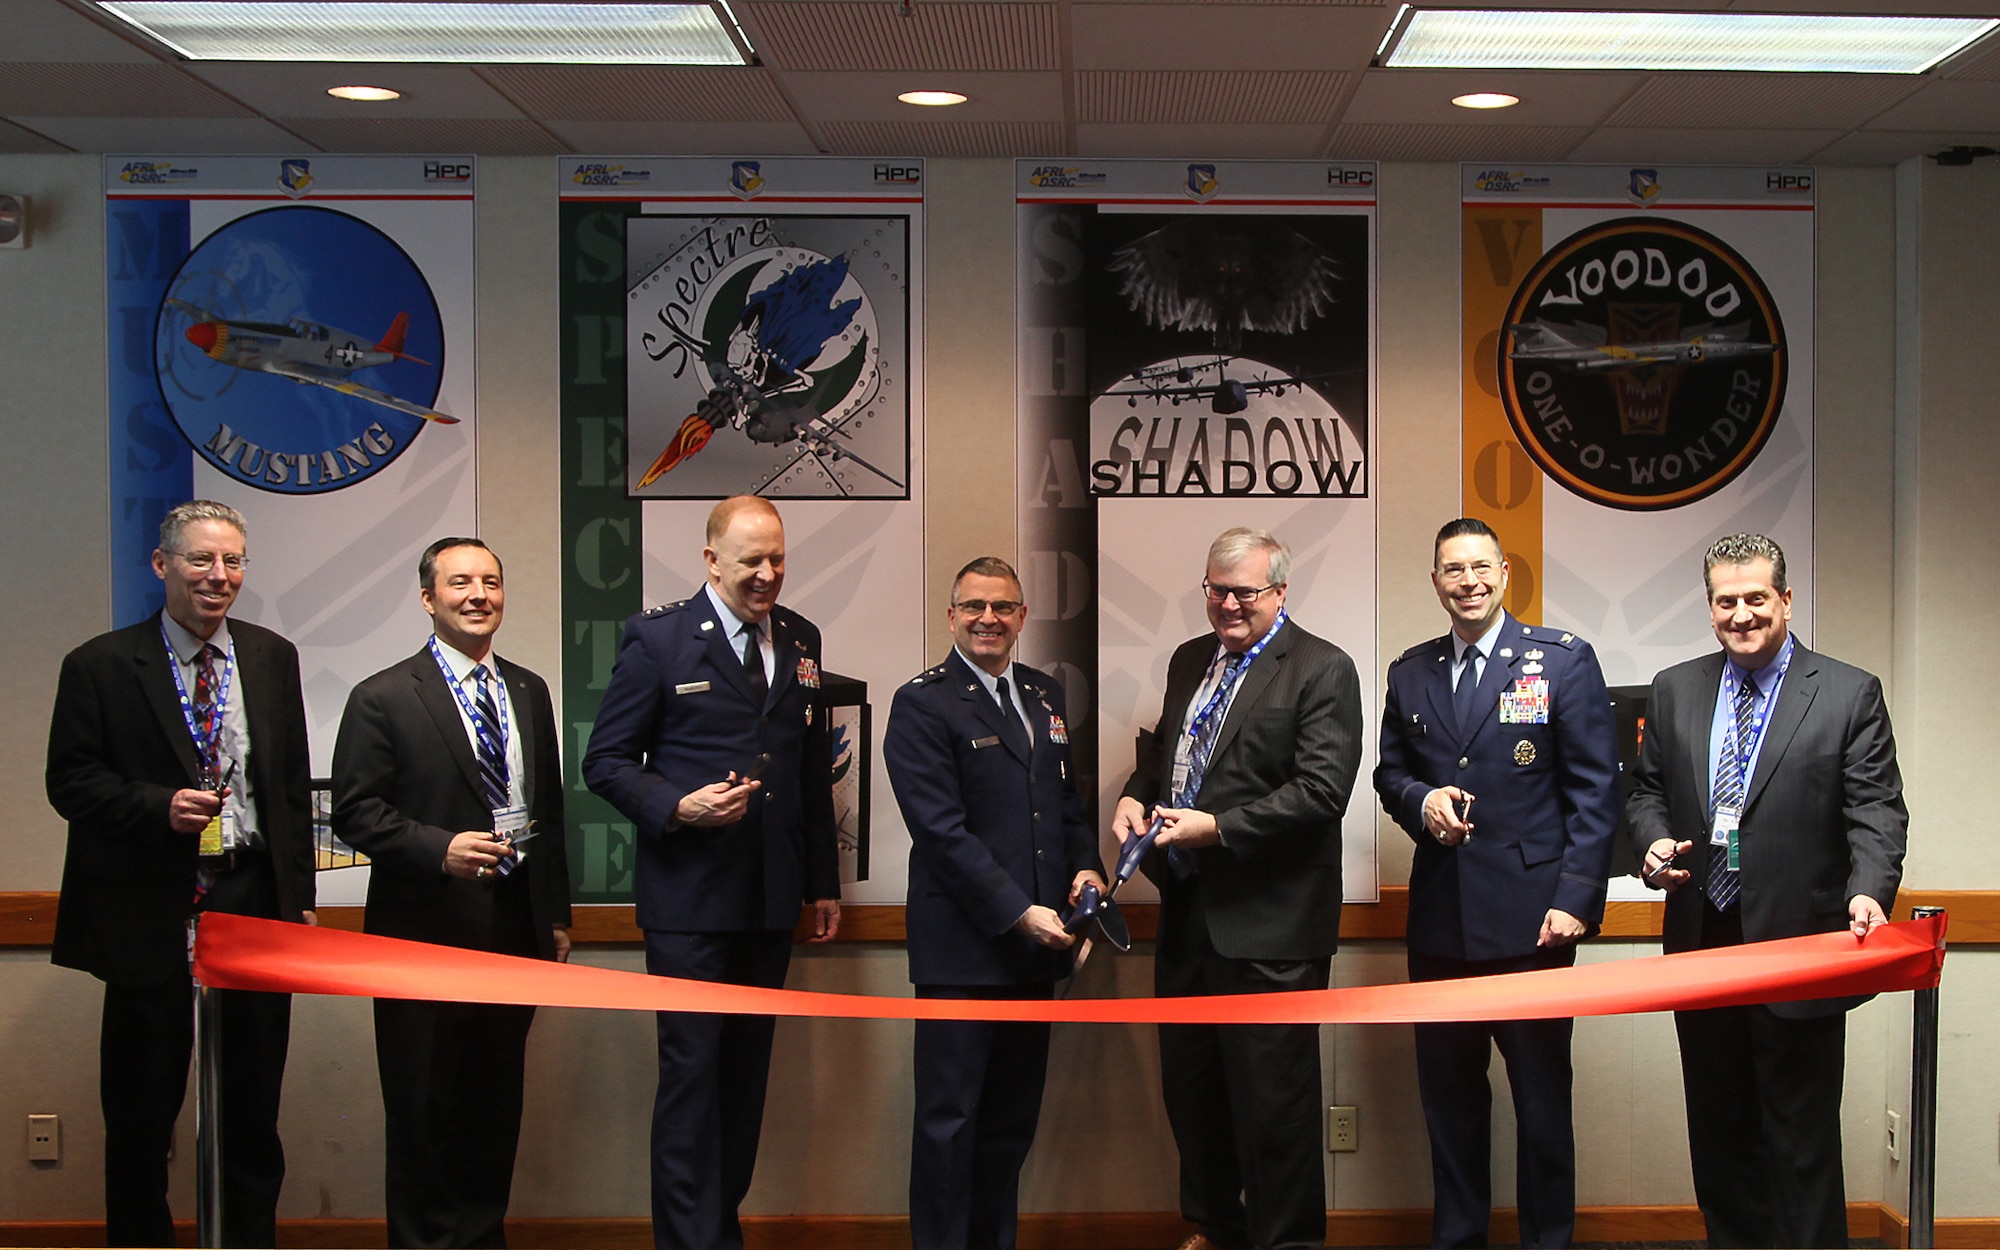 Members of Wright-Patterson Air Force Base and Department of Defense leadership cut the ribbon for a new DOD super computer capability located at Wright-Patterson Air Force Base, Ohio, Feb. 26. This is the first-ever shared classified Department of Defense high performance computing capability. (Courtesy photo)